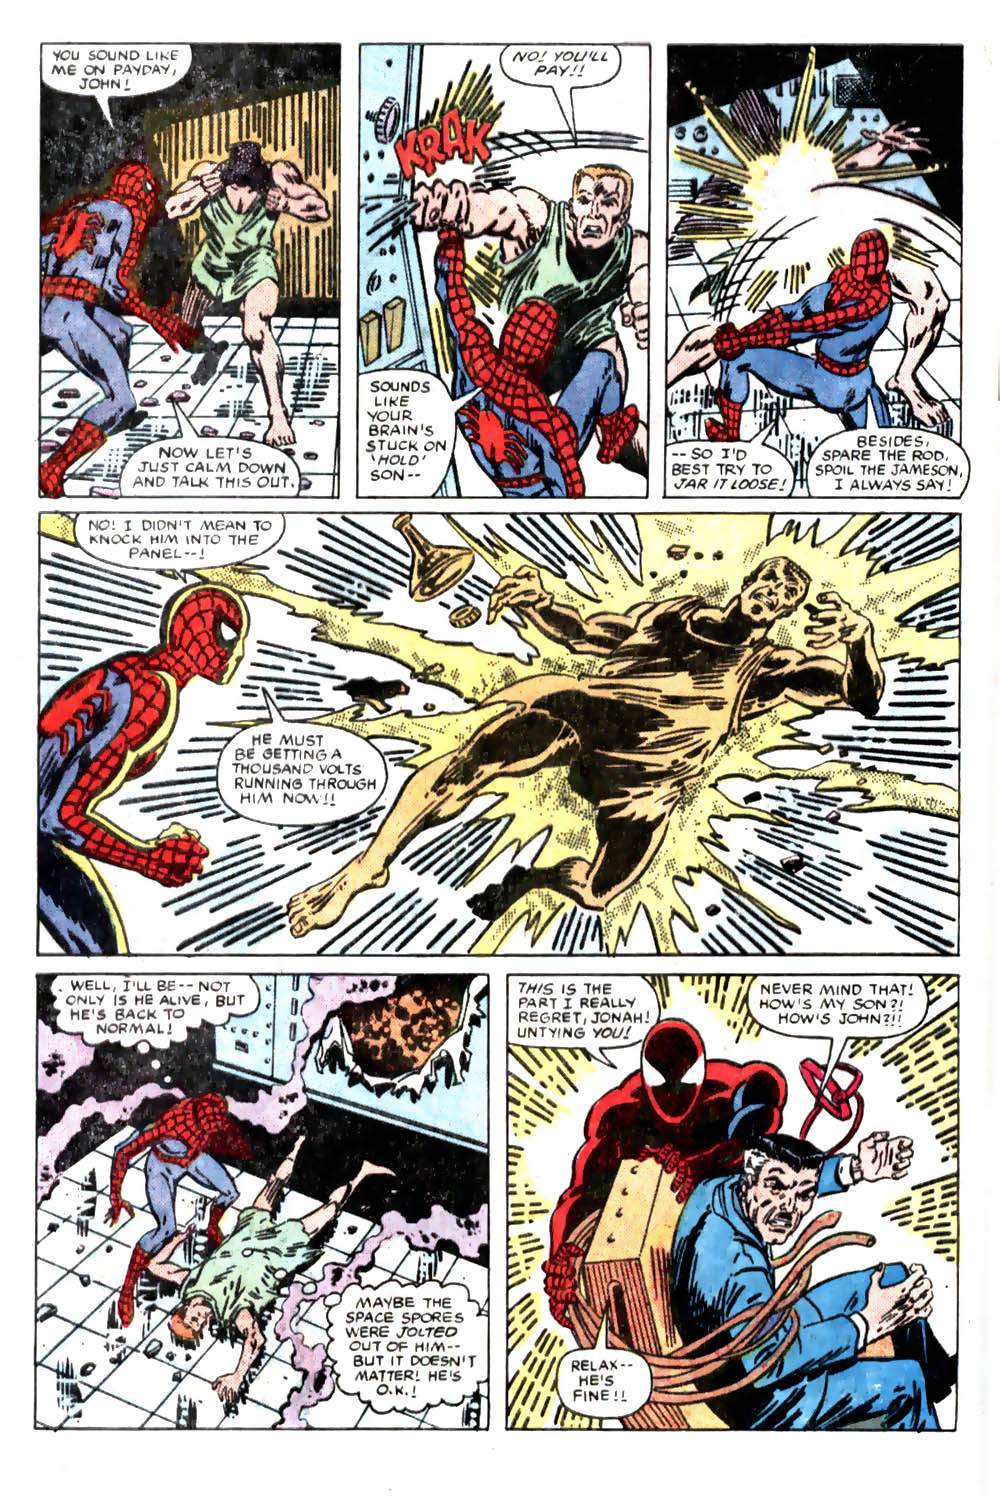 What If? (1977) issue 46 - Spiderman's uncle ben had lived - Page 39